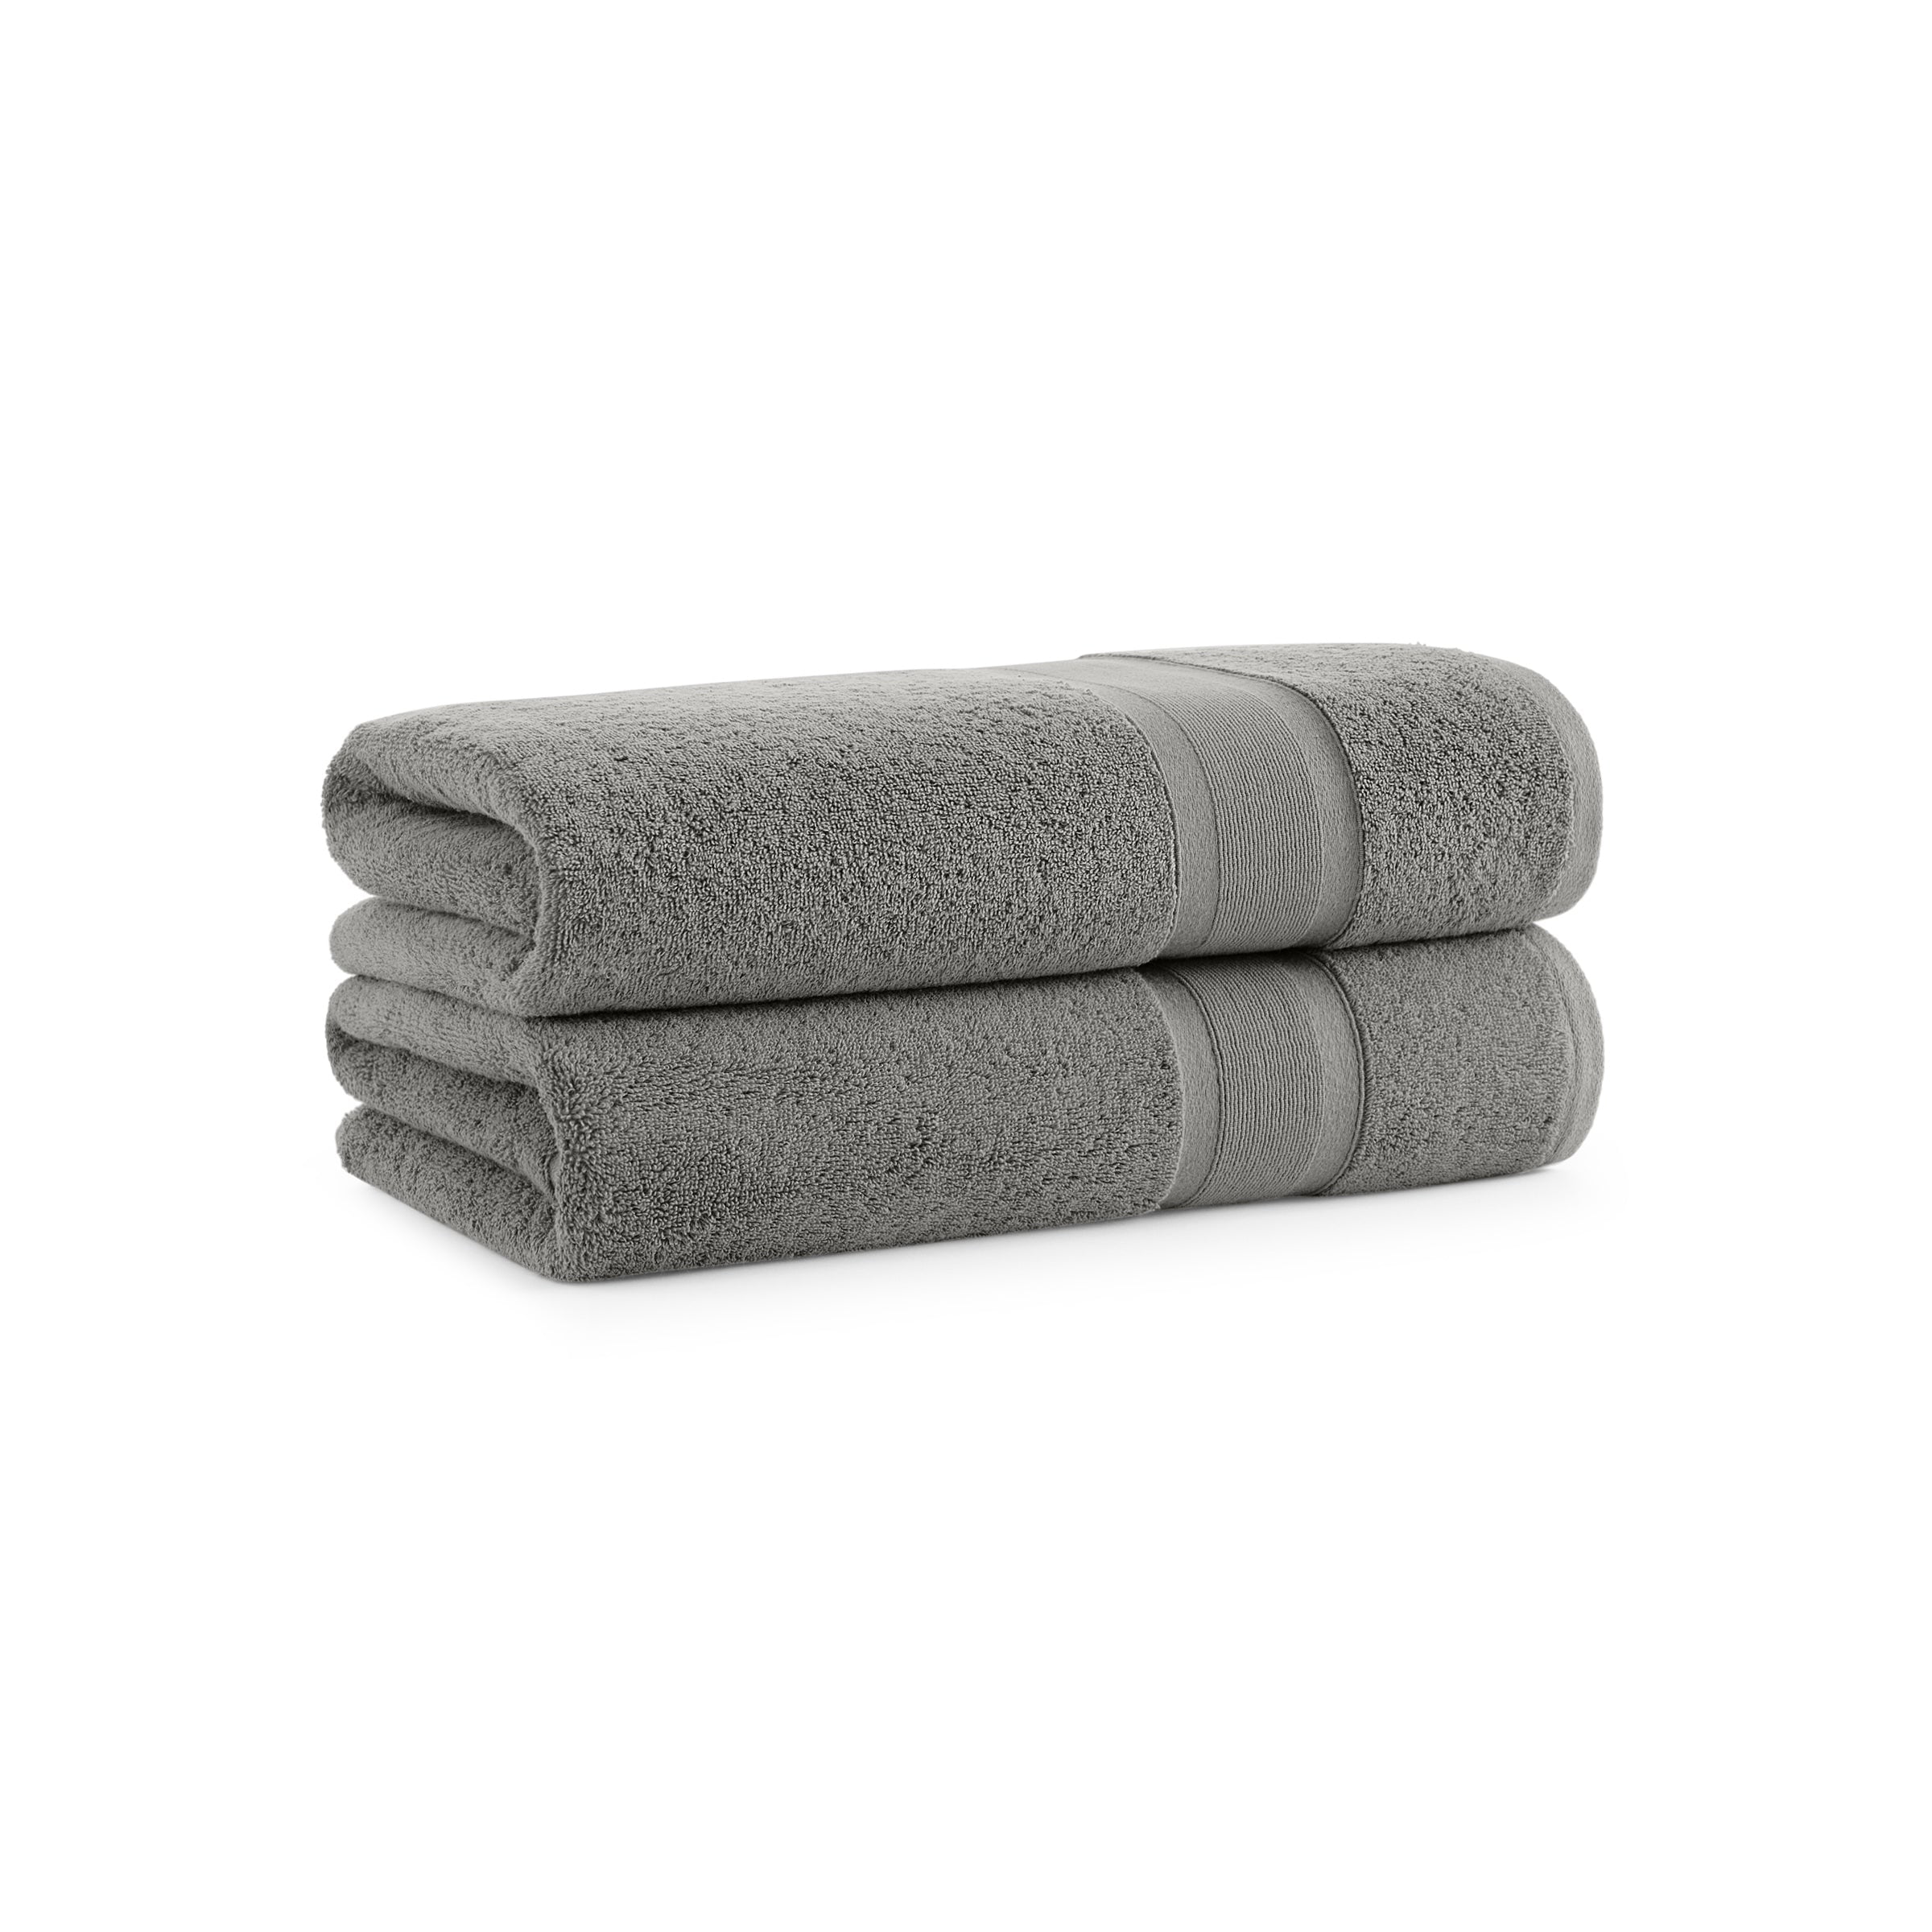 Aston & Arden Eco-Friendly Aegean Bath Towels (2 Pack), Recycled Ultra  Plush Turkish Cotton, 30x60 in., White with Light Grey Striped Woven Dobby  